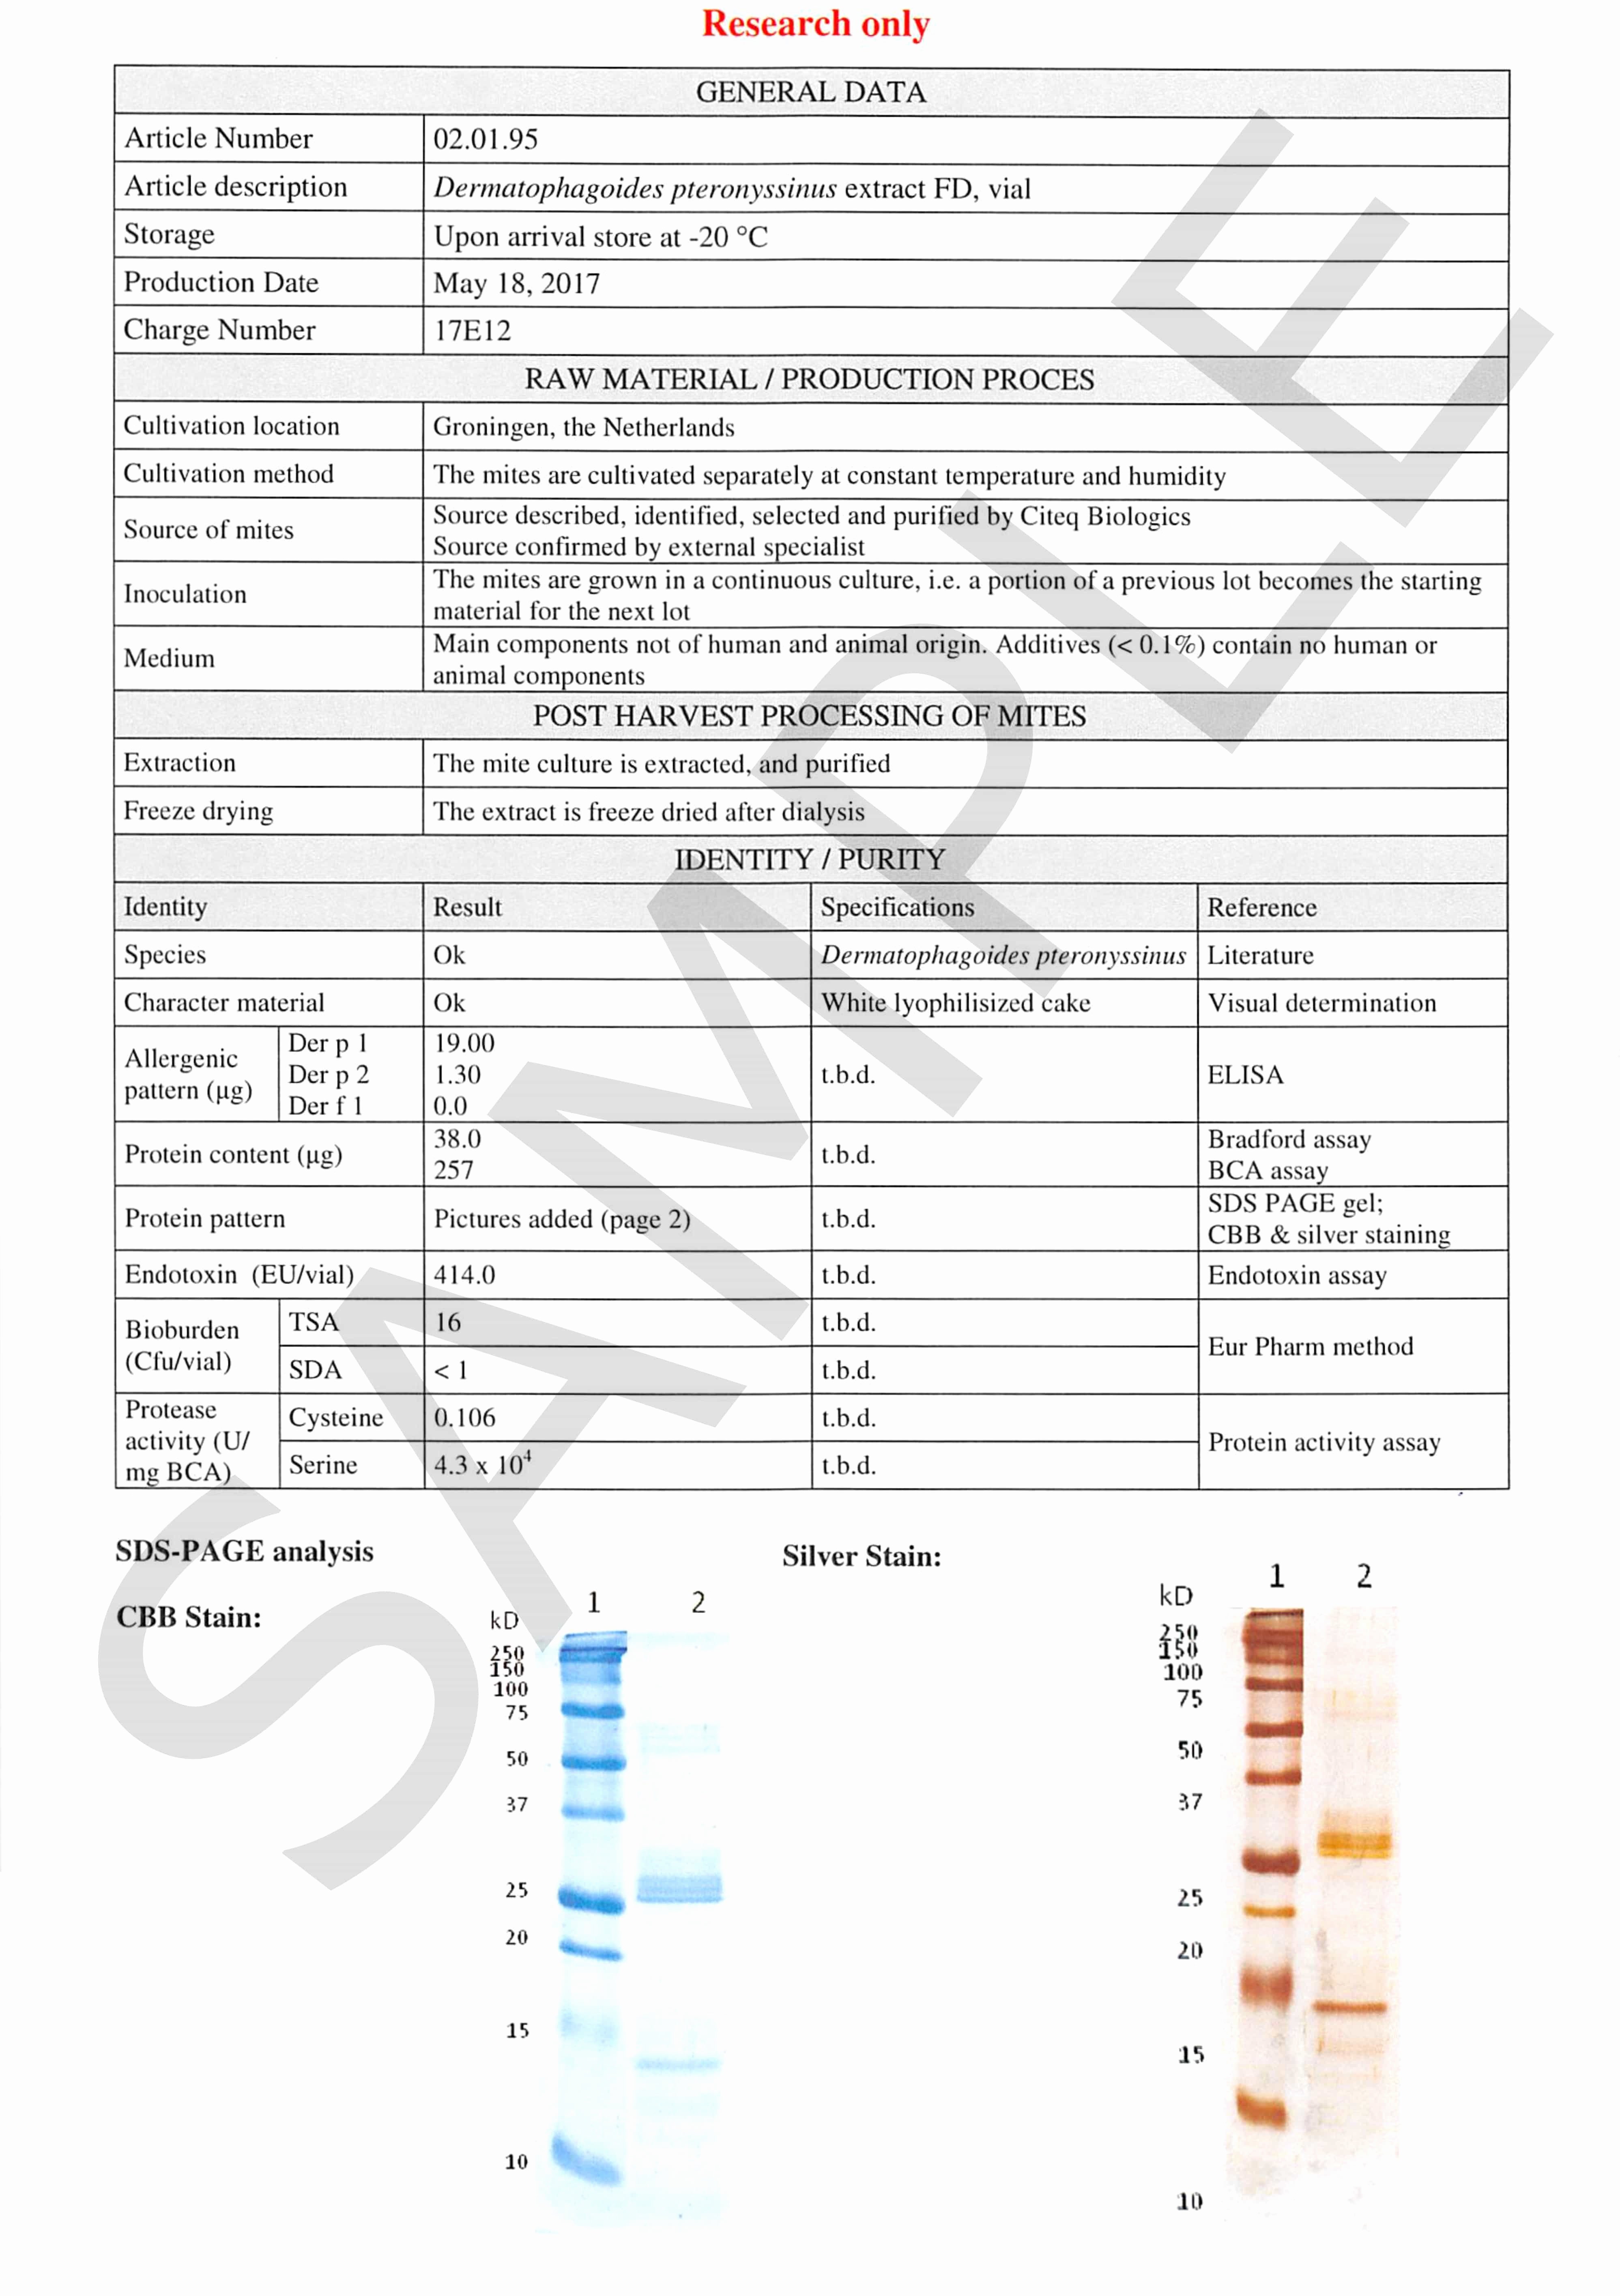 Certificate Of Analysis Template Luxury Certificate Of Analysis Hdm Extract 95 Sample Citeq